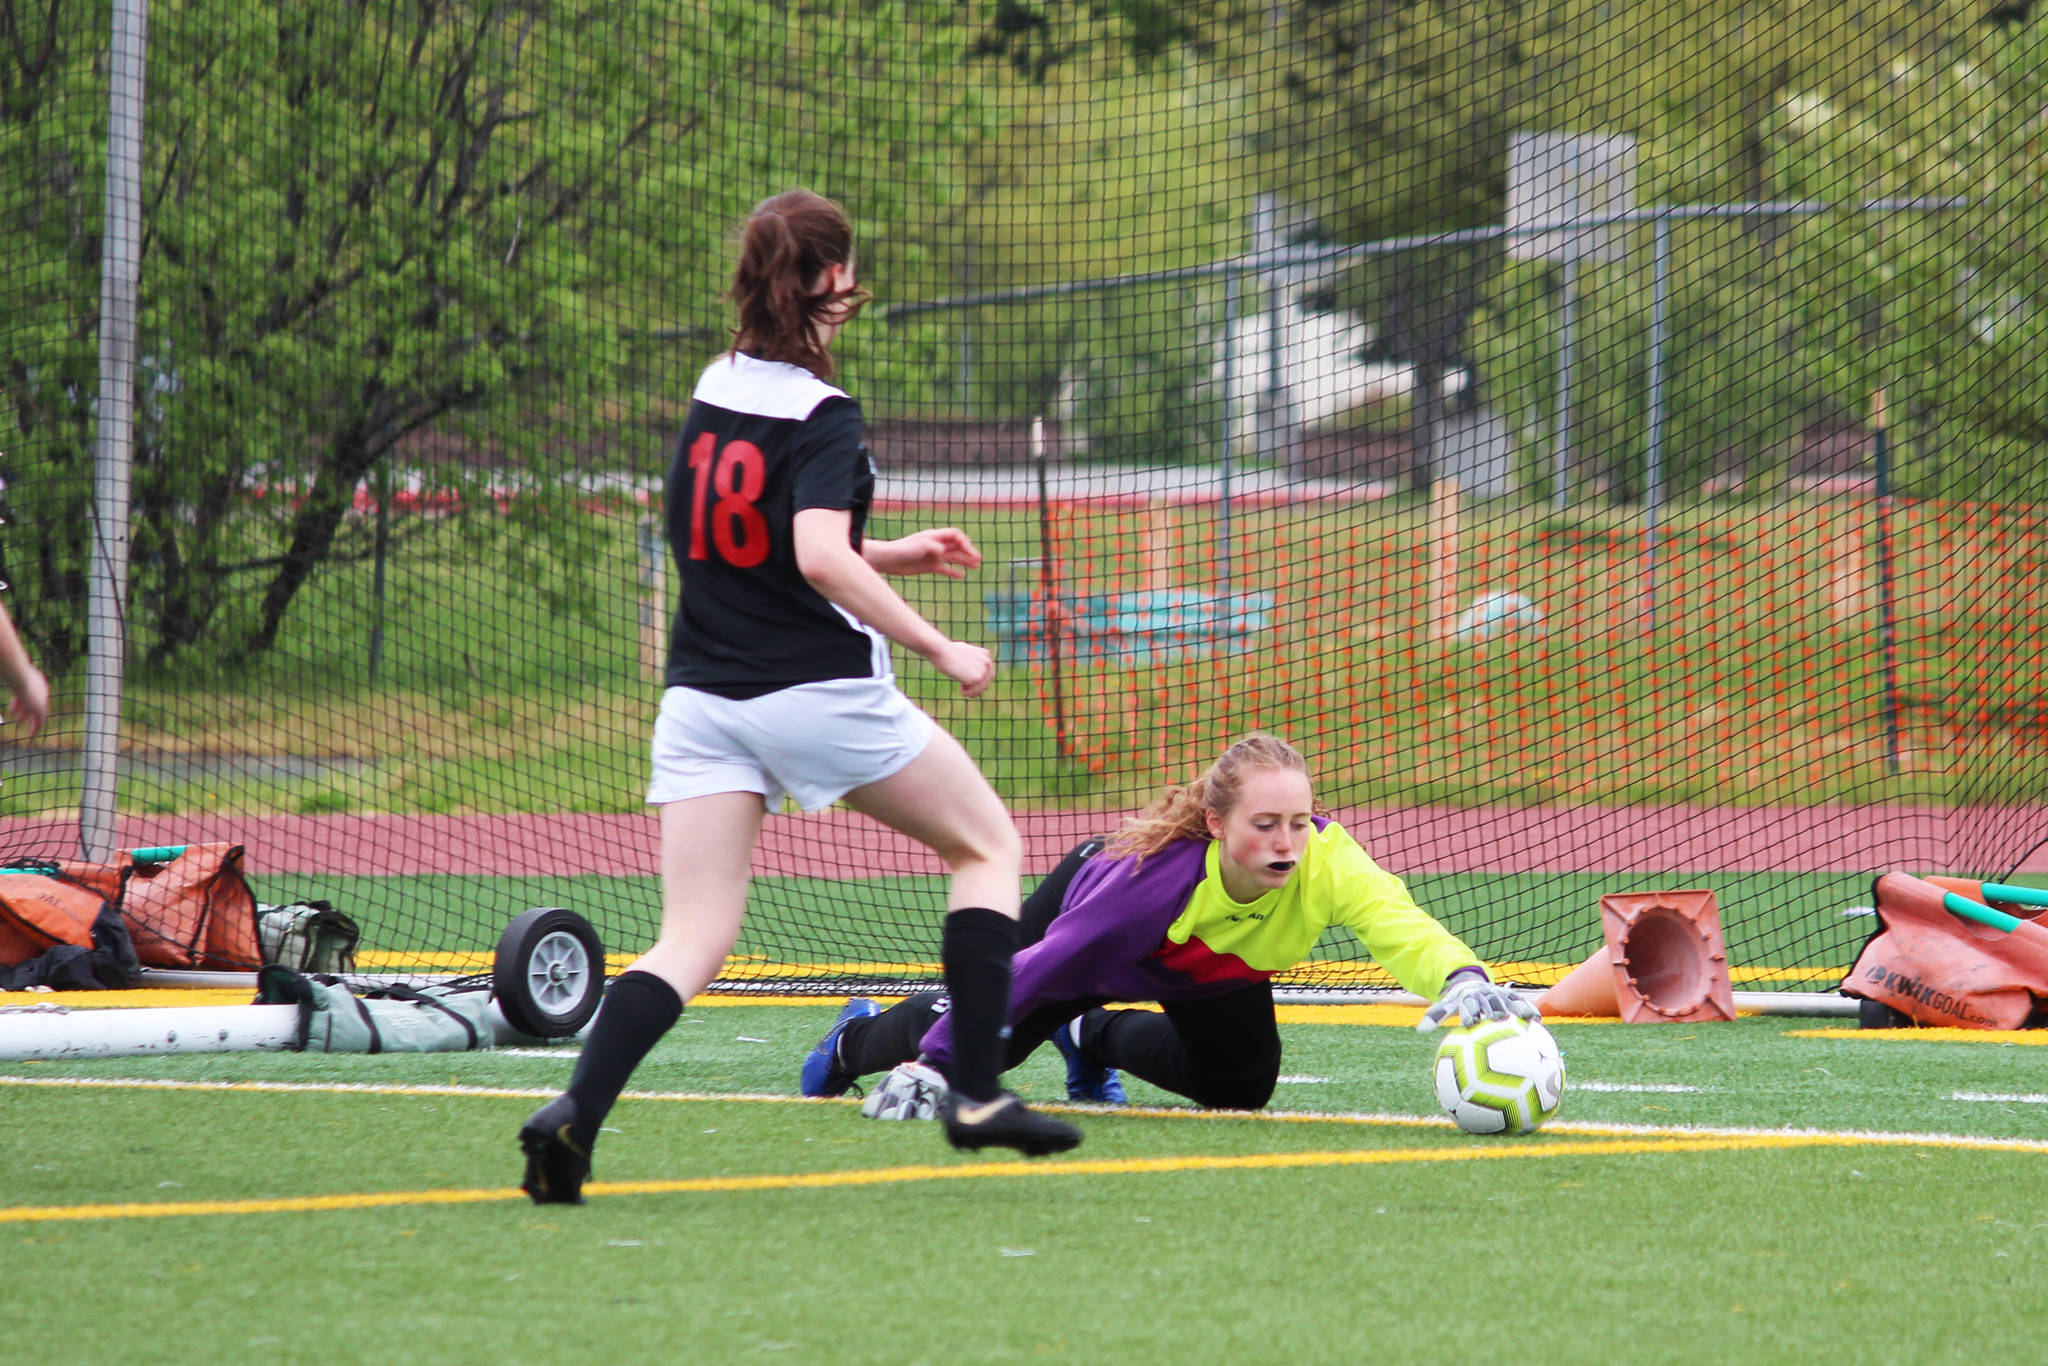 Soldotna goalkeeper Katie Delker gets a hand on the ball during the championship game of the Division II state soccer tournament Saturday, May 25, 2019 at Service High School in Anchorage, Alaska. (Photo by Megan Pacer/Homer News)